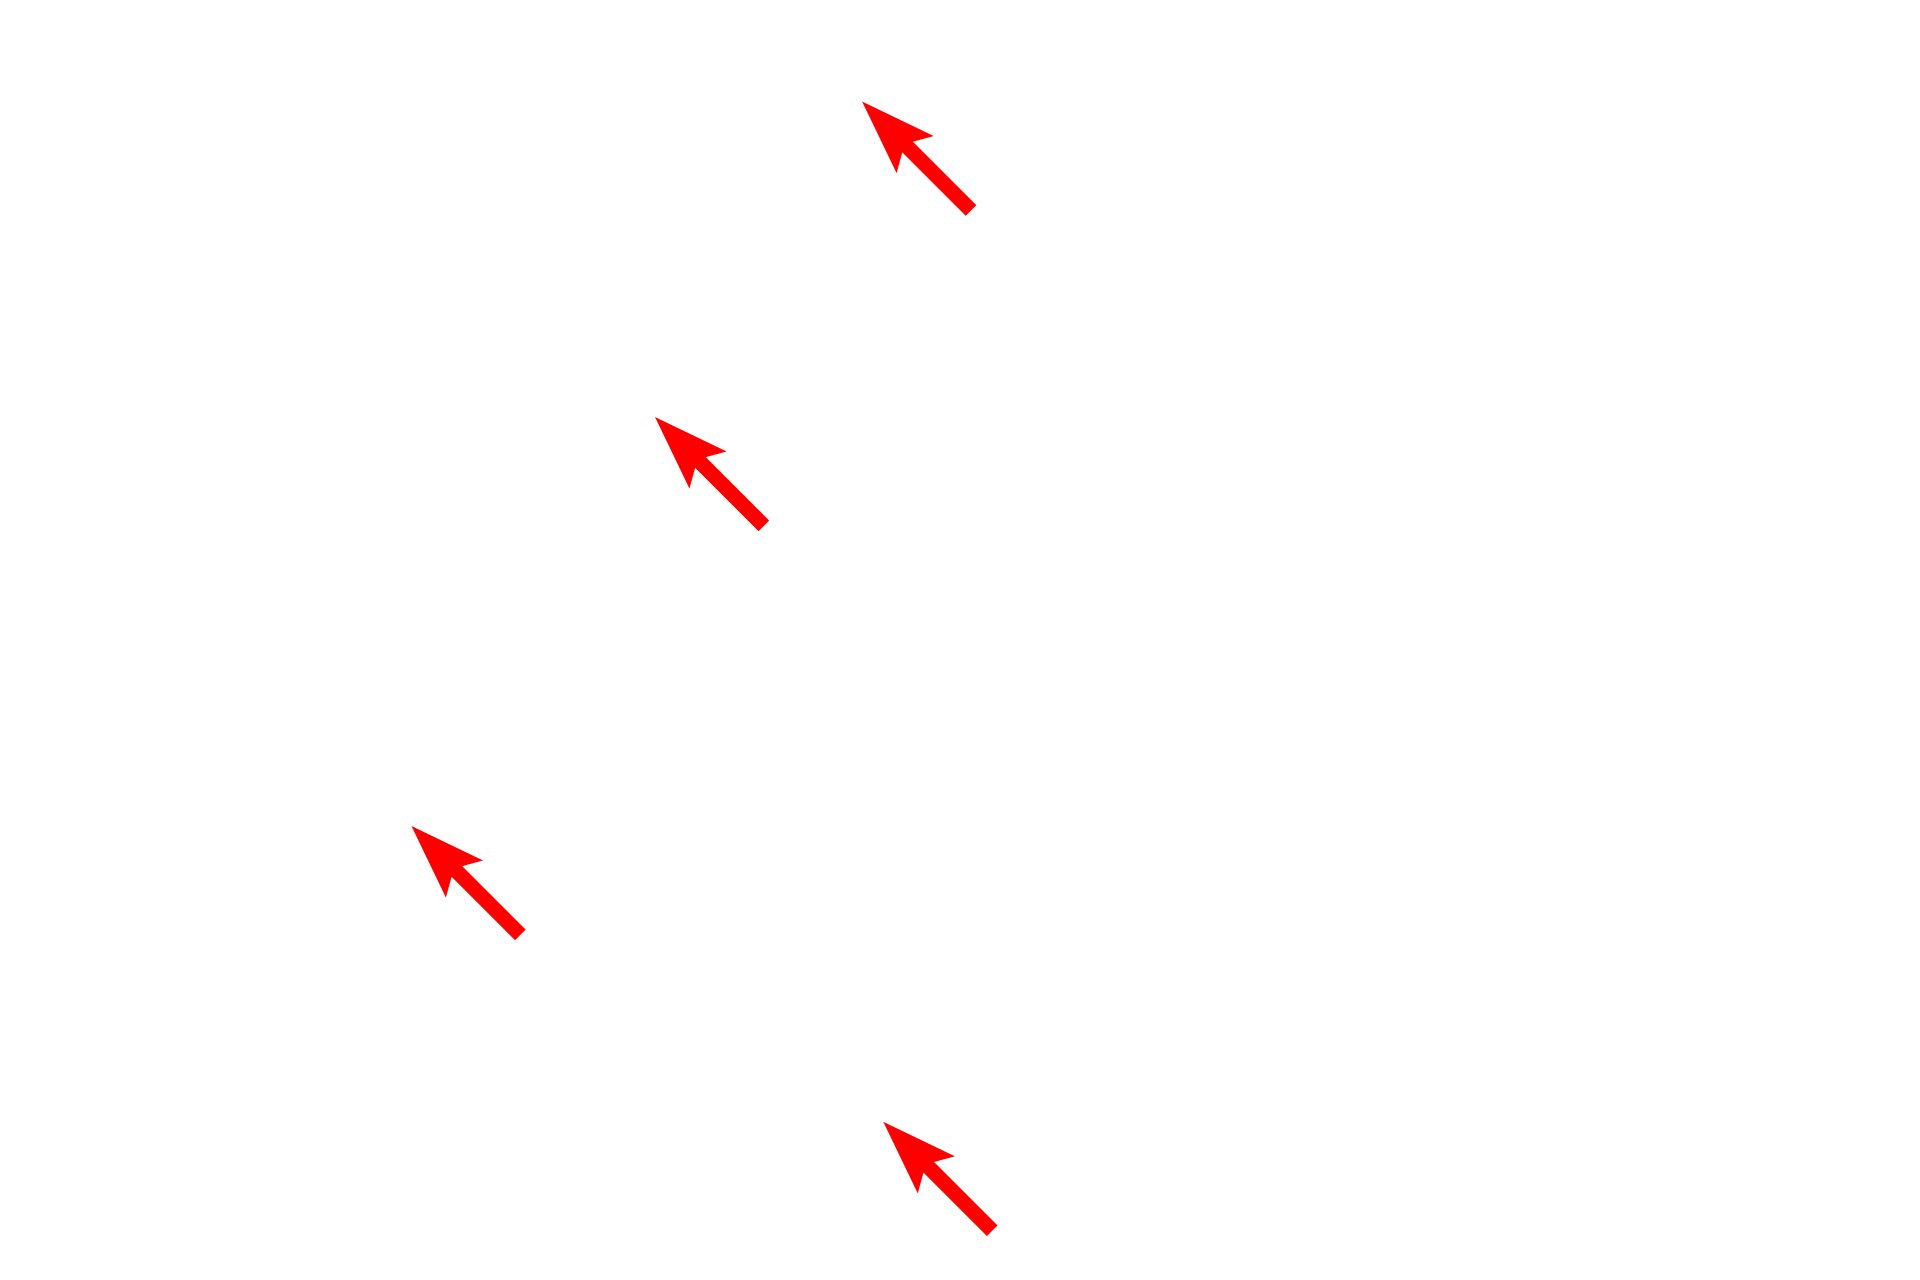  - Glycogen <p>Sinusoids, discontinuous capillaries, are lined by a fenestrated endothelium with additional gaps between adjacent cells.  The discontinuous basal lamina allows easy access between the sinusoid and the space of Disse, located between sinusoids and adjacent hepatocytes.  Kupffer cells (liver macrophages) span sinusoids, phagocytosing aged erythrocytes and debris.  5000x</p>
